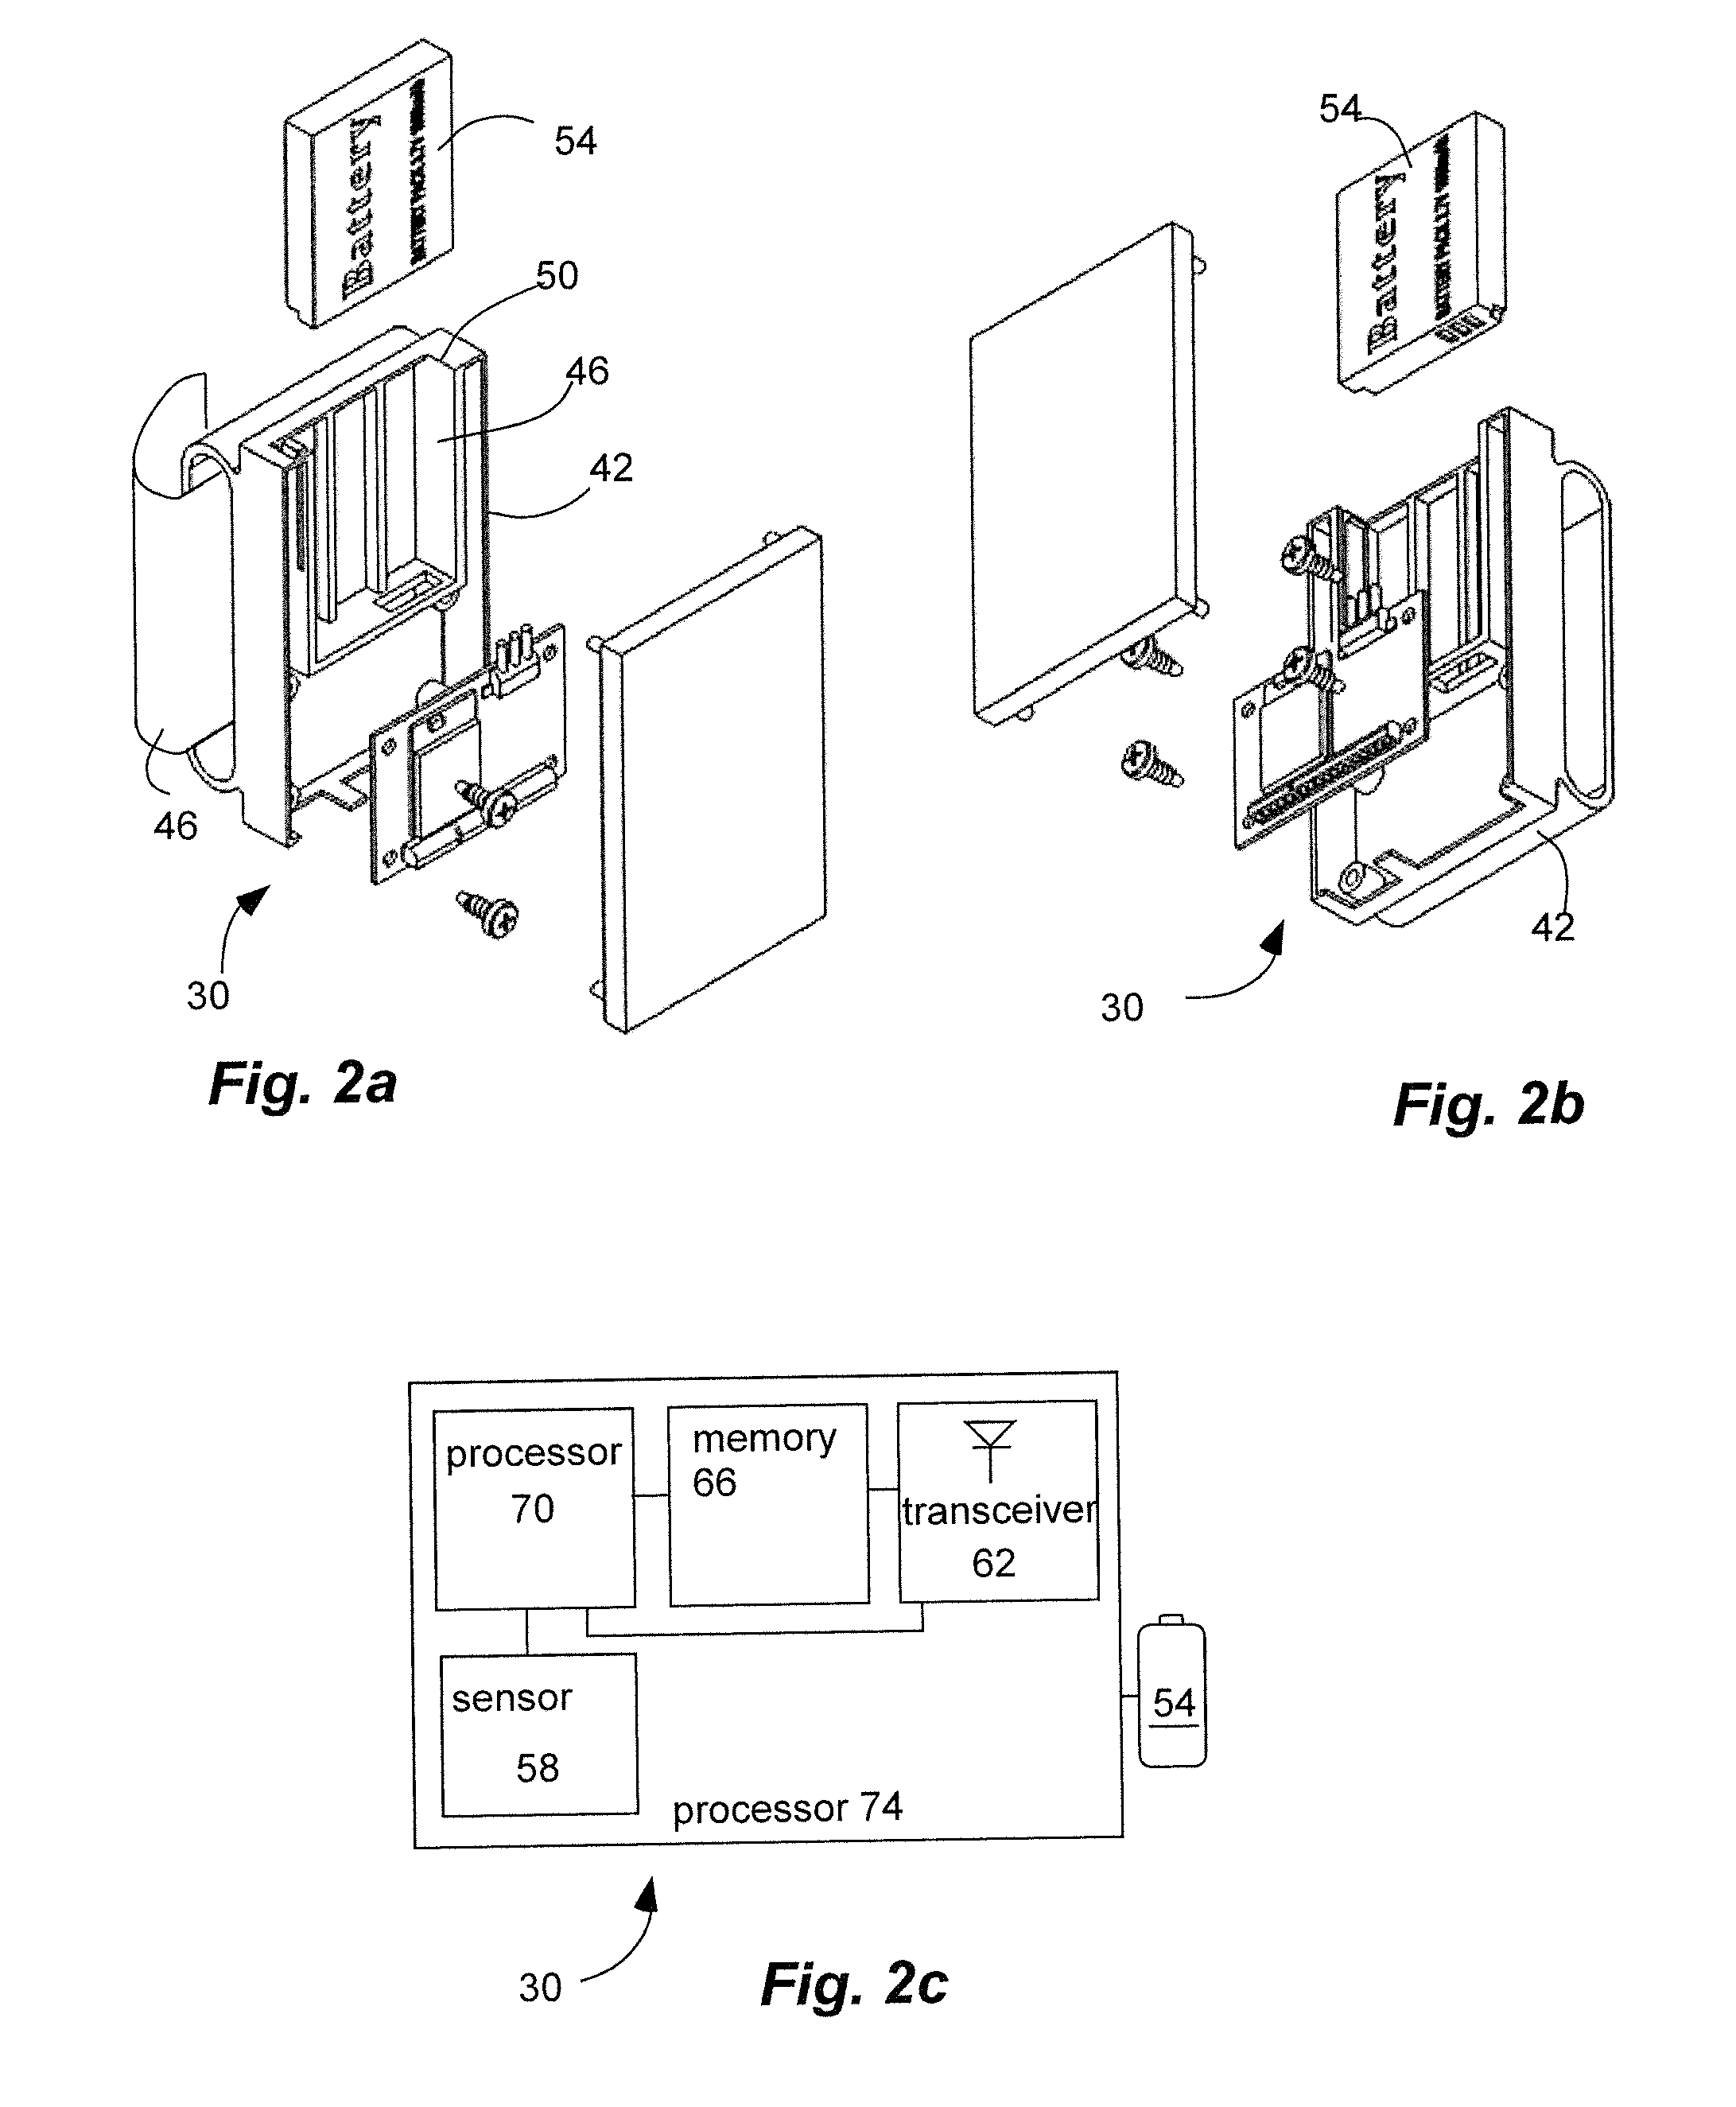 Method and System for Analyzing a Movement of a Person